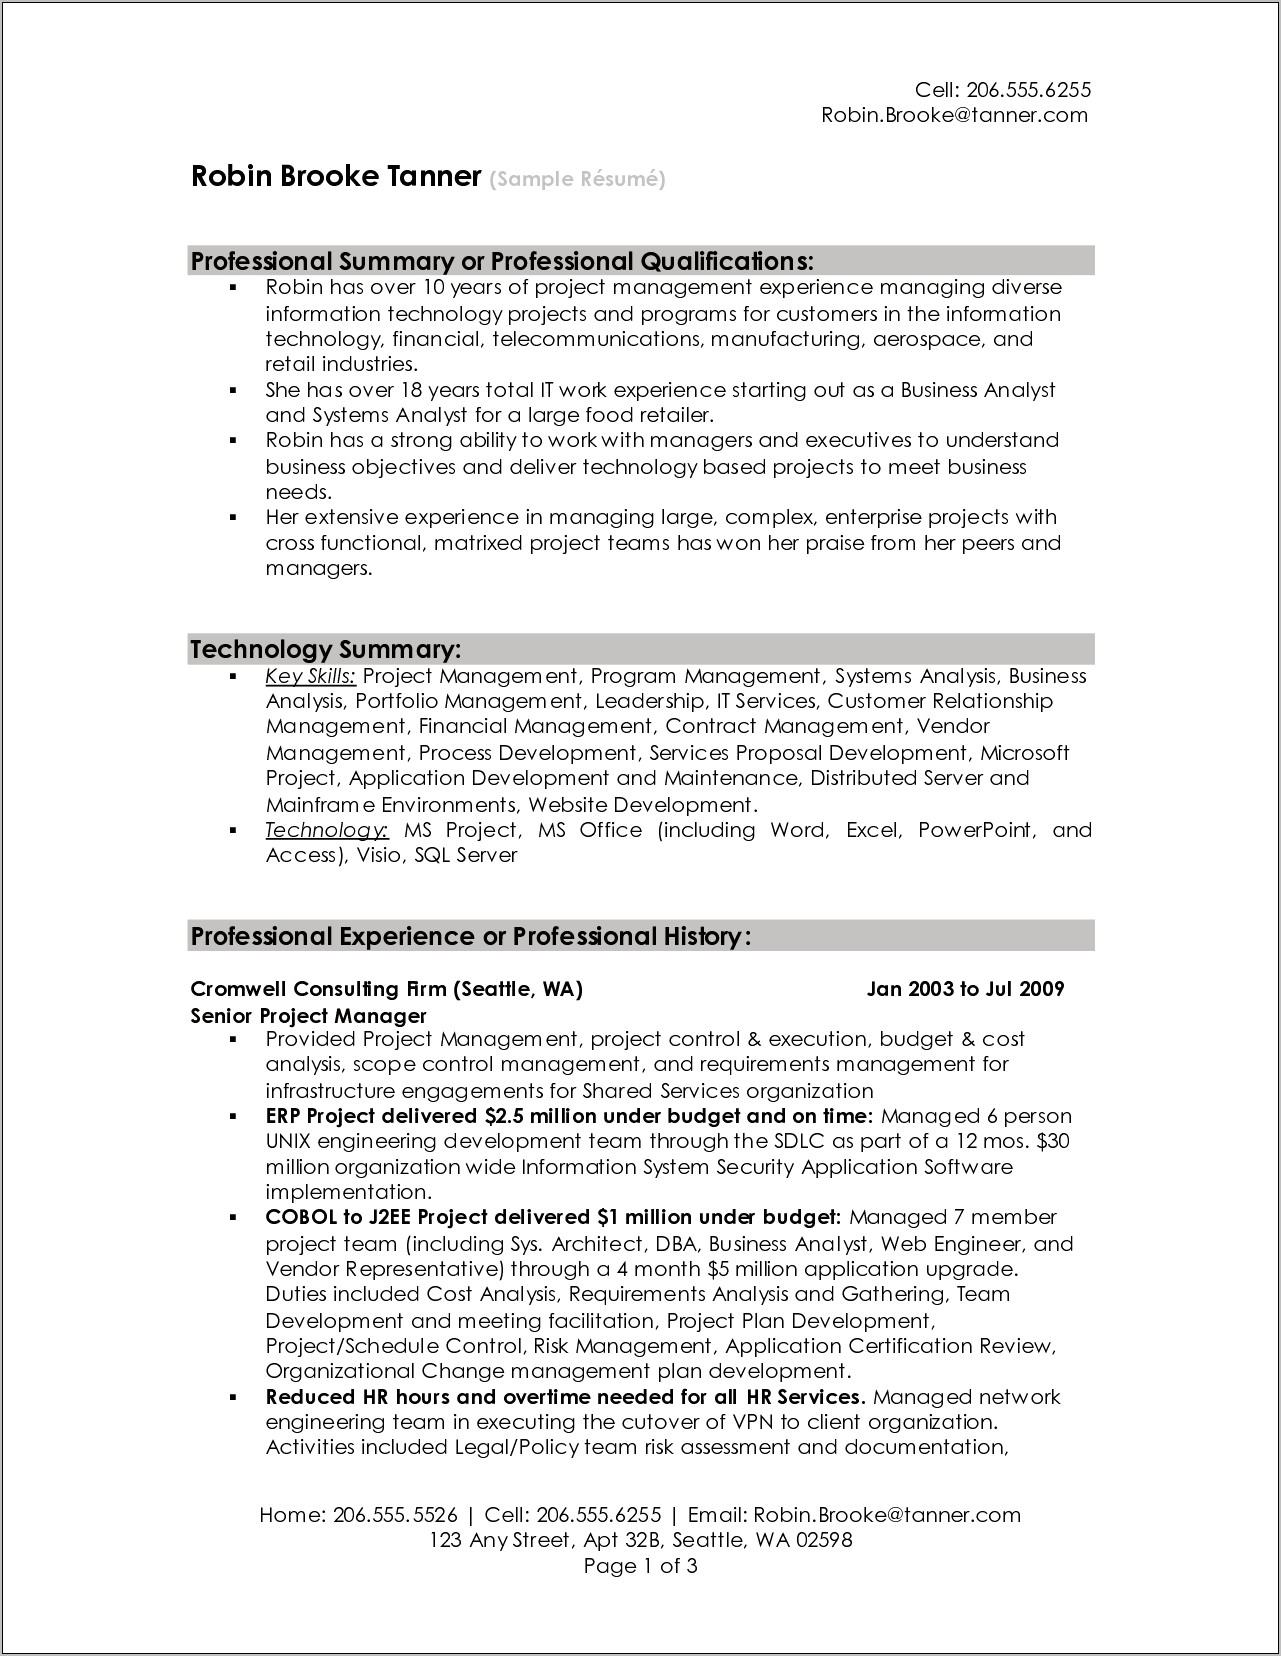 Examples Of A Professional Summary For Resume